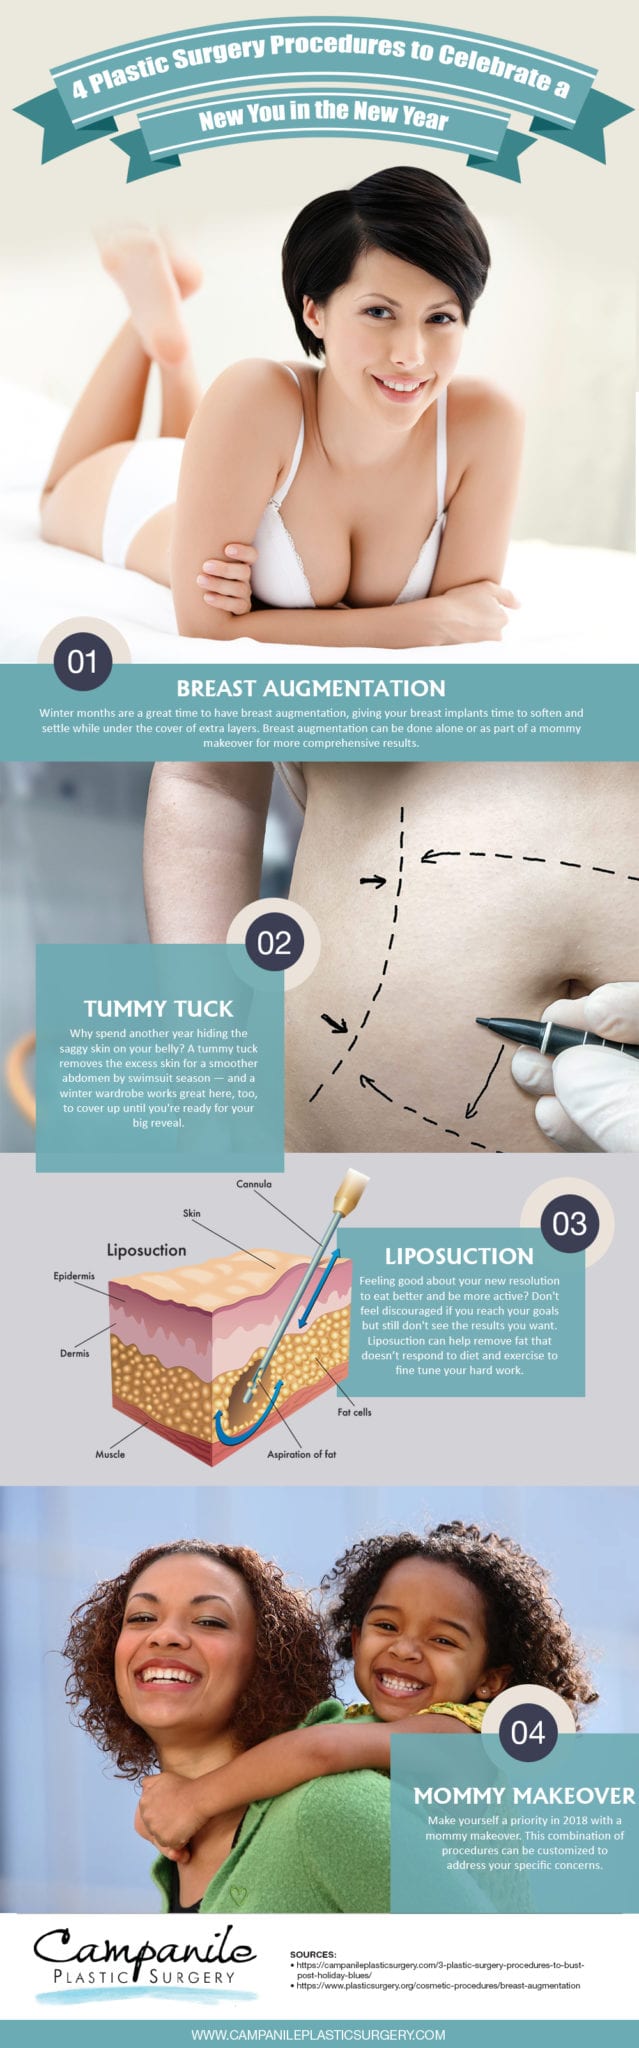 4 Plastic Surgery Options for a New You in the New Year 